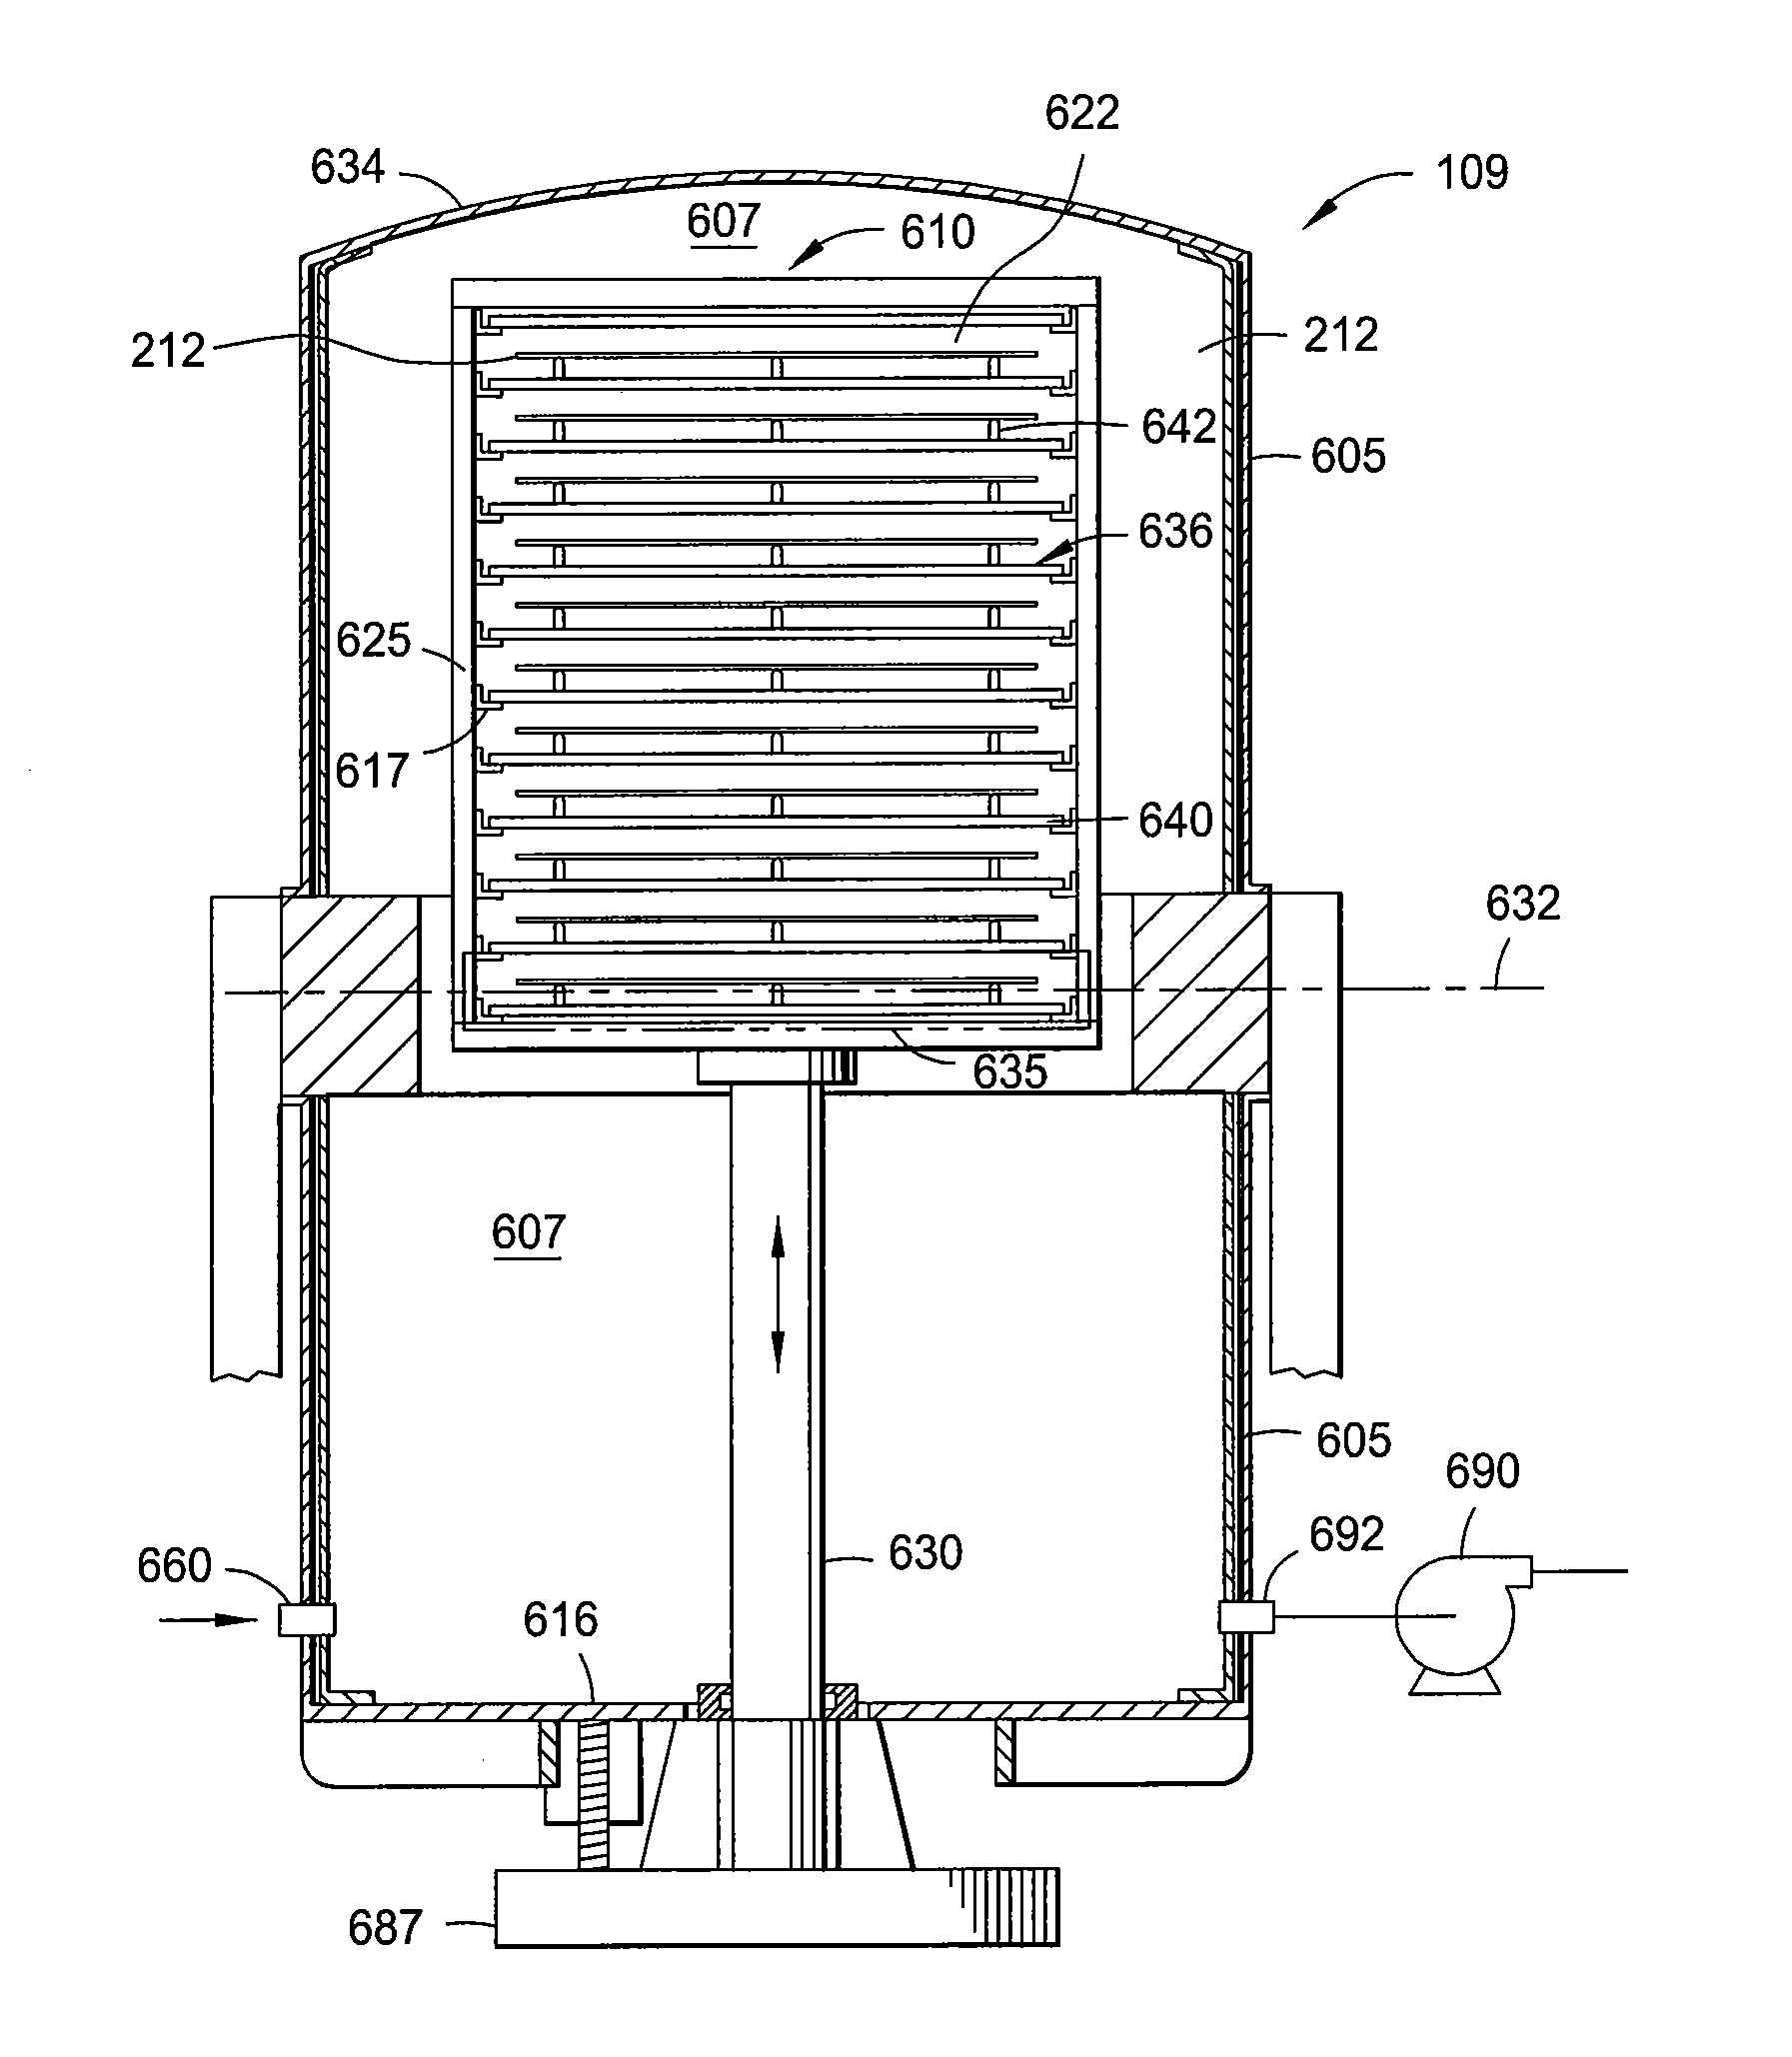 Processing system for fabricating compound nitride semiconductor devices